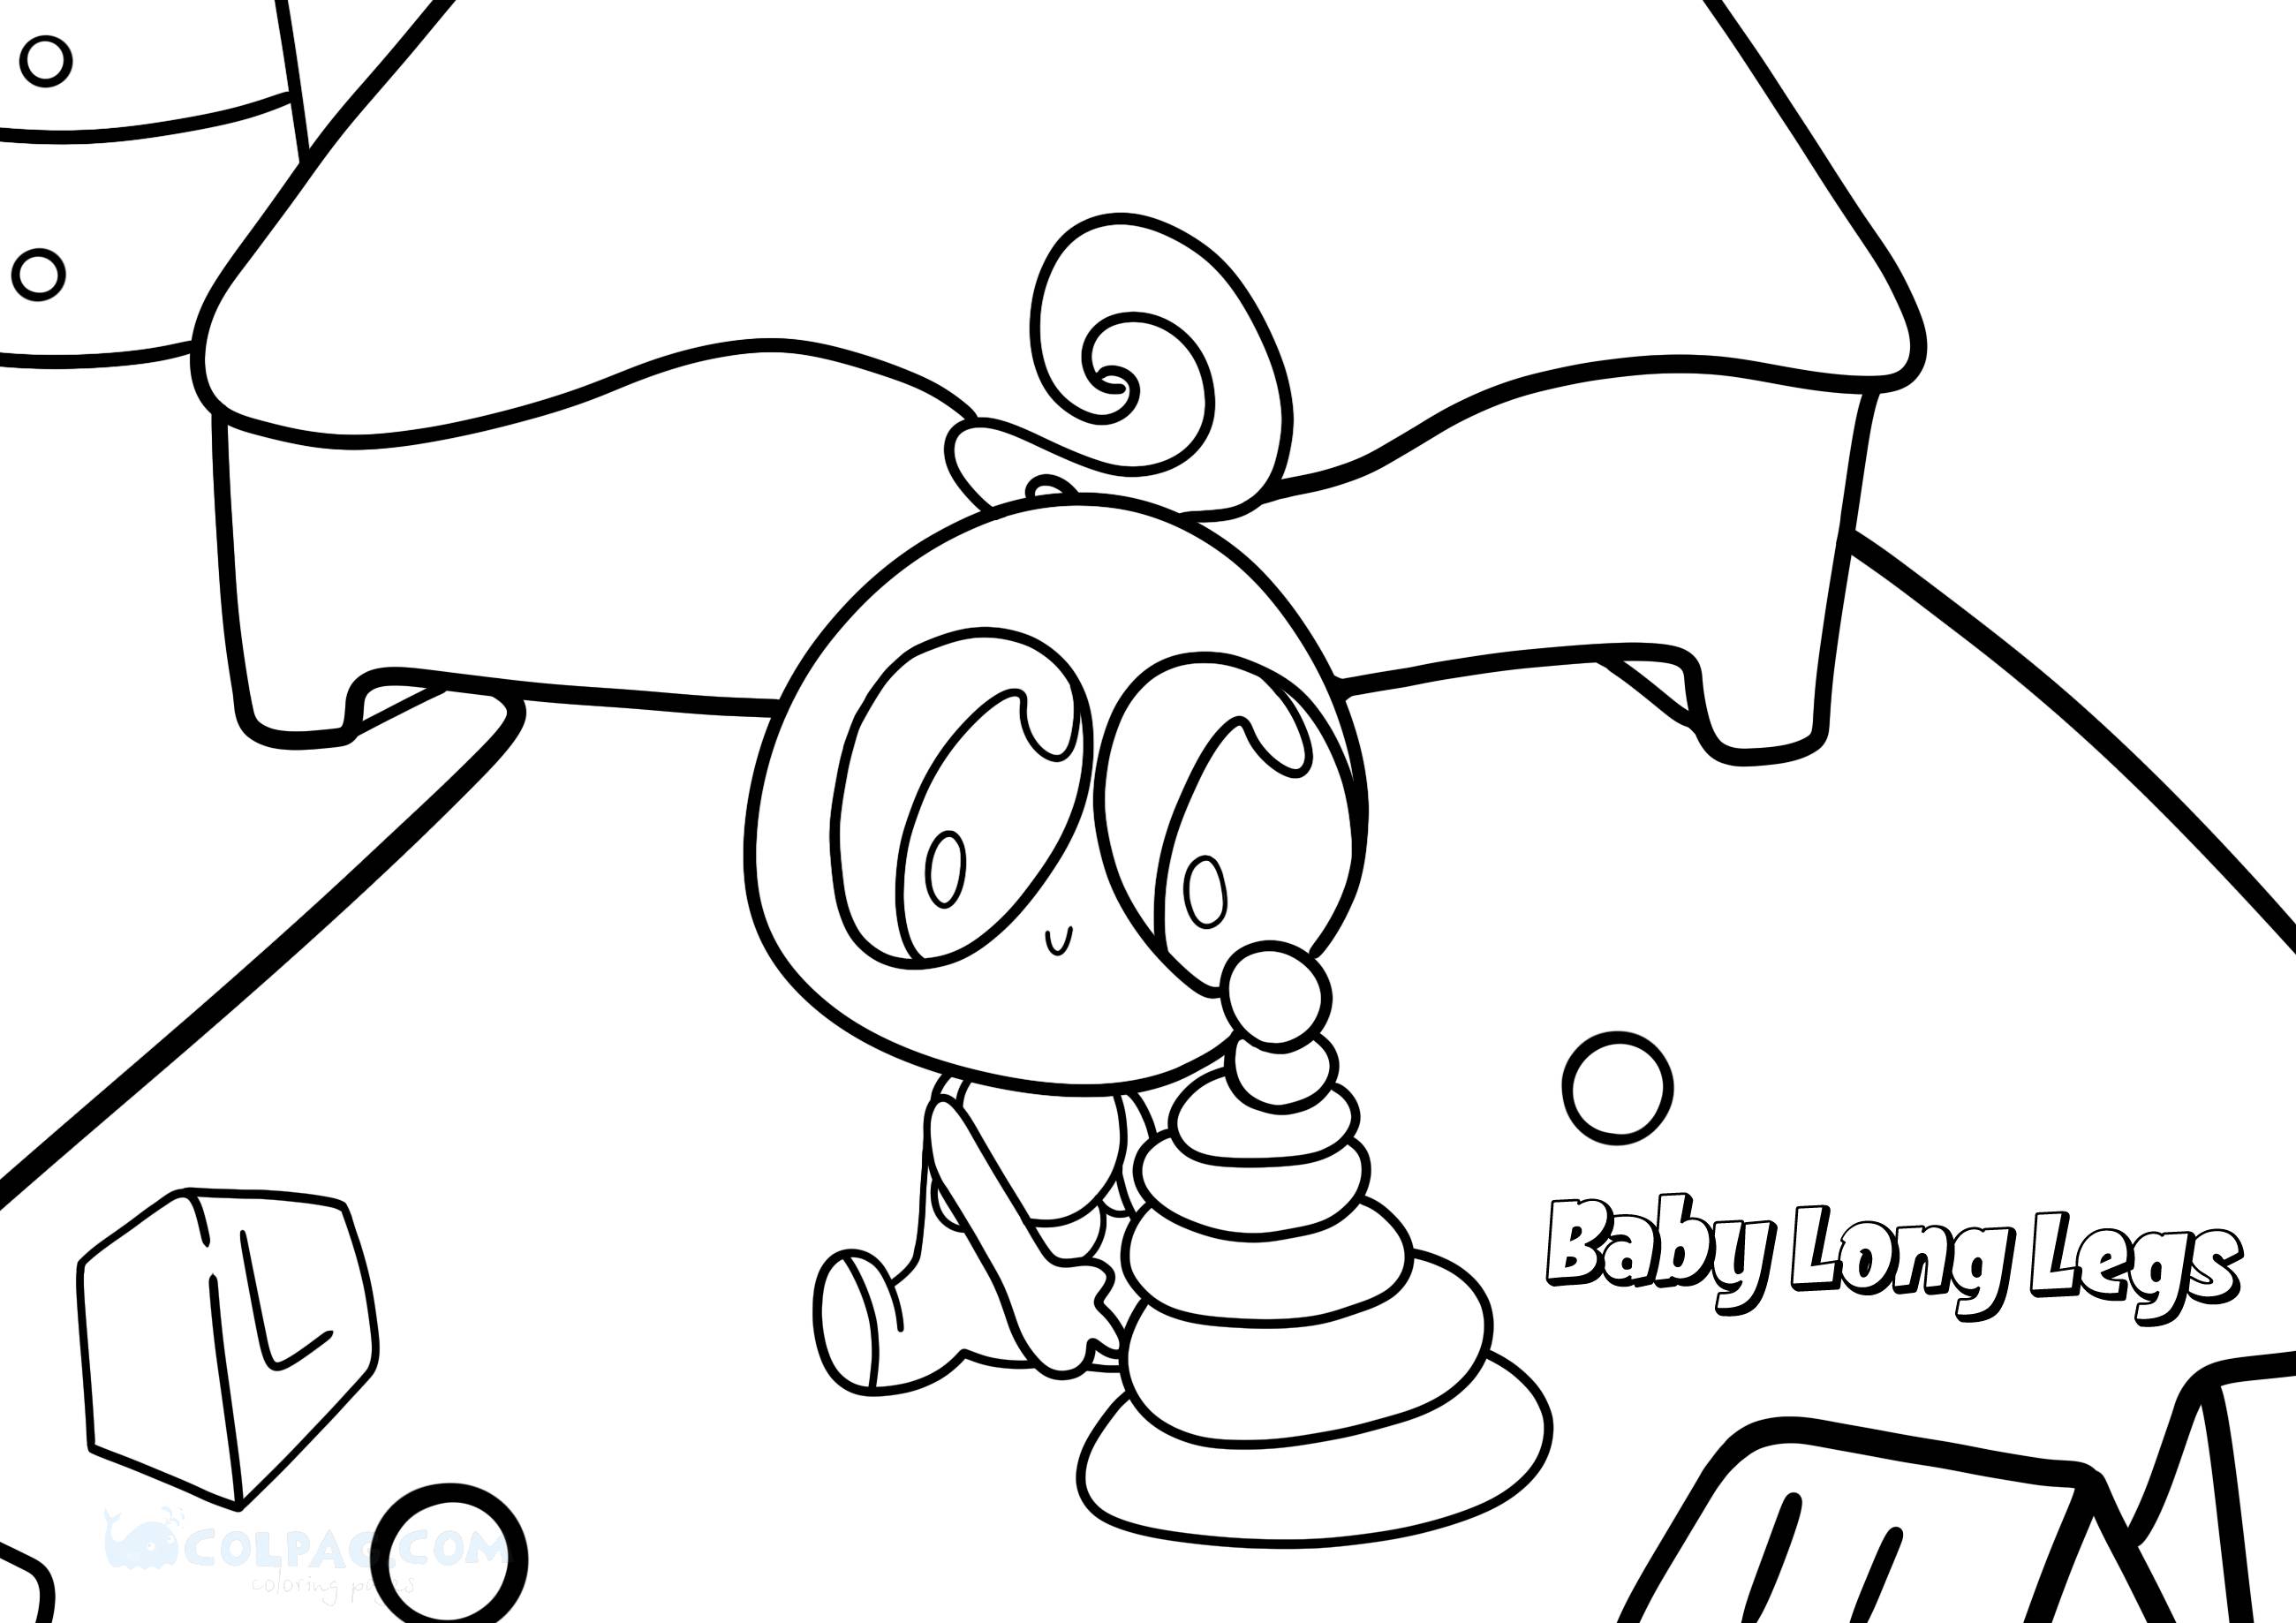 baby-long-legs-coloring-page-colpag-com-19